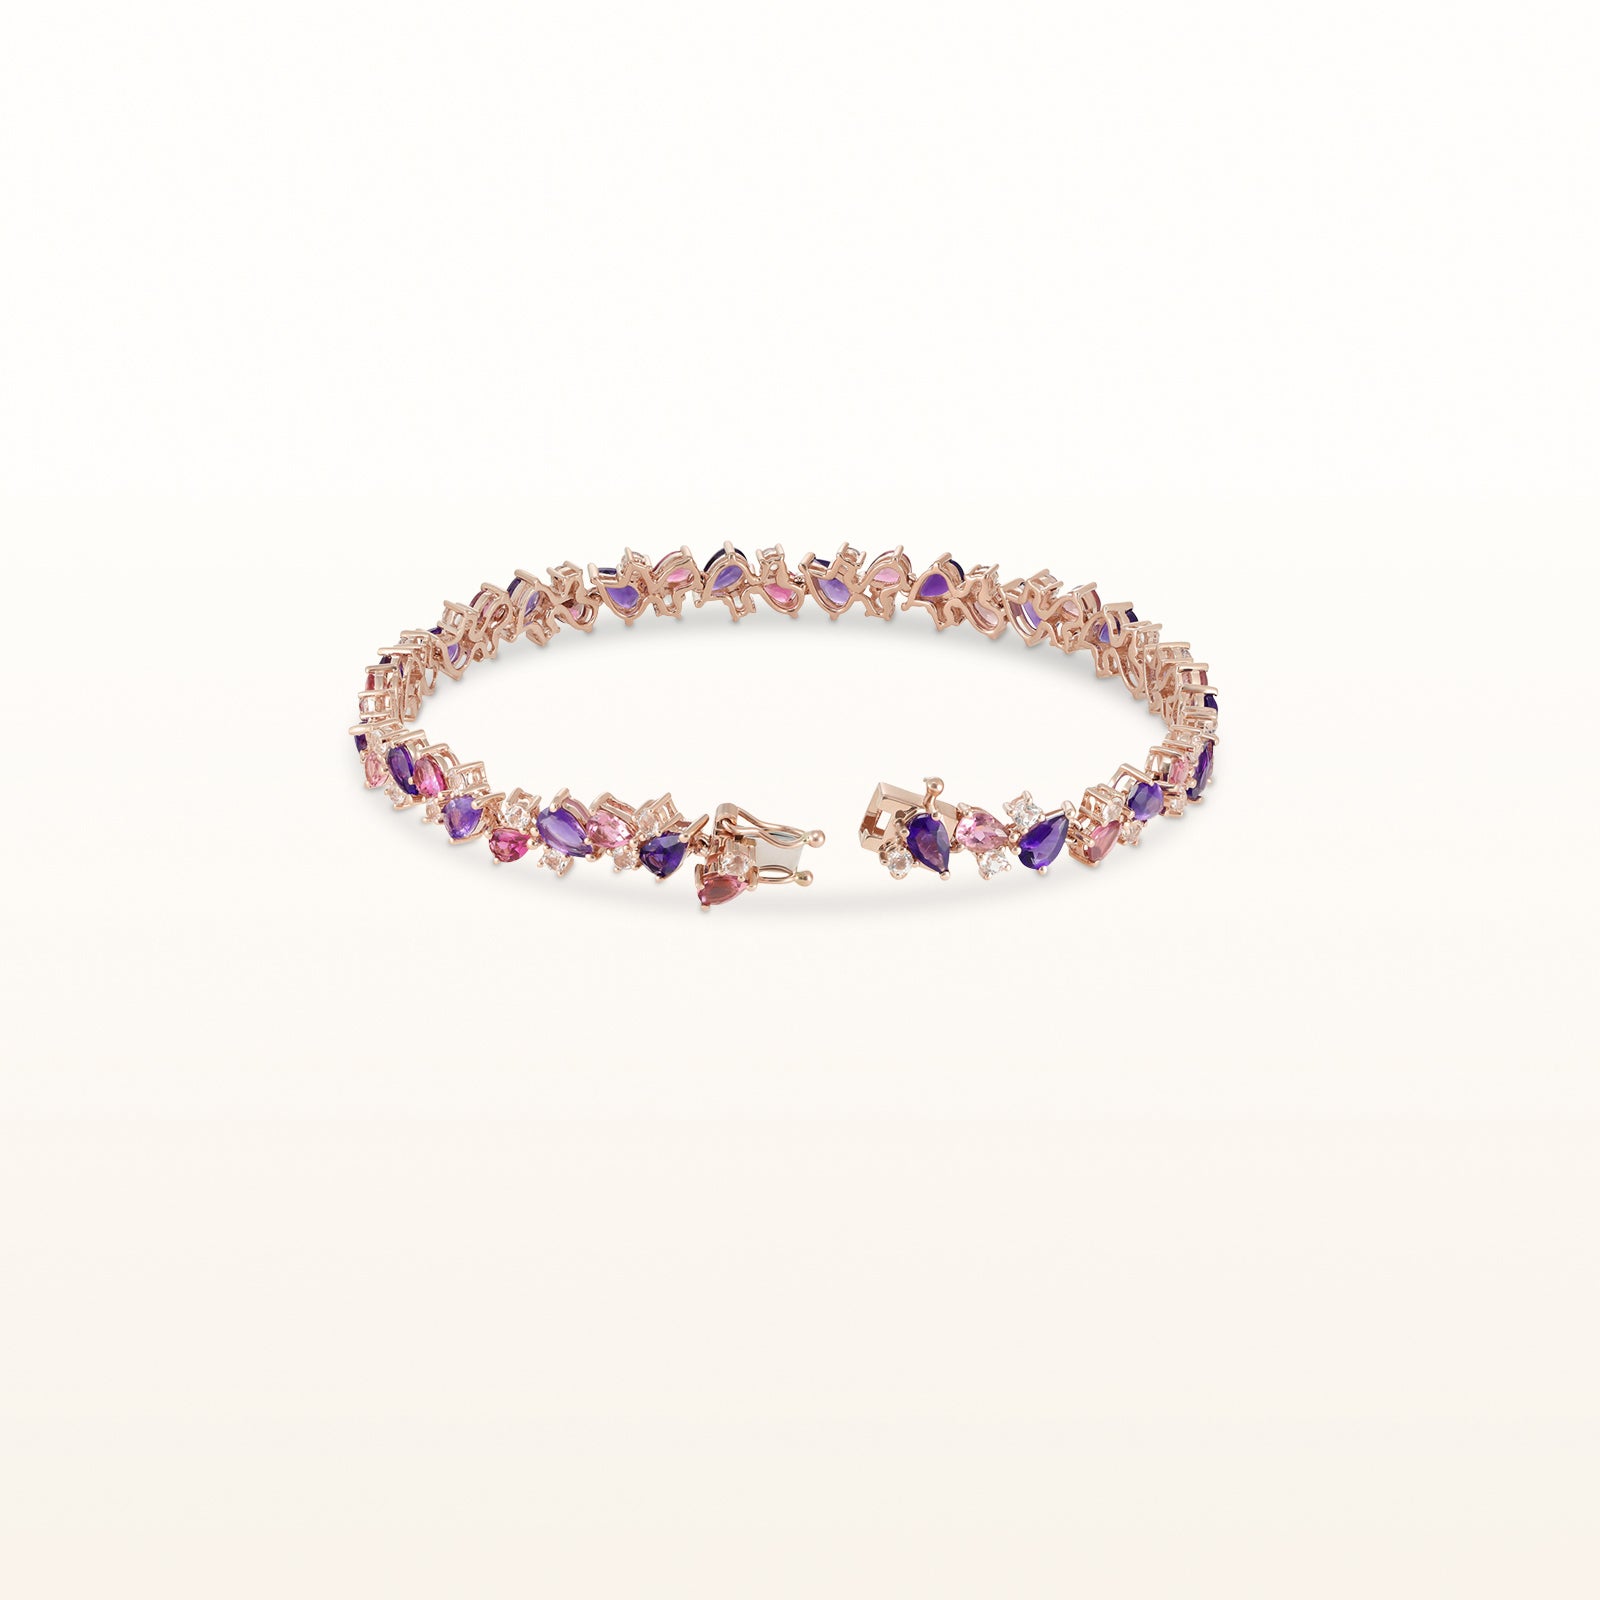 Pear Shaped Amethyst and Pink Tourmaline Bracelet with White Topaz Accents in 14kt Rose Gold